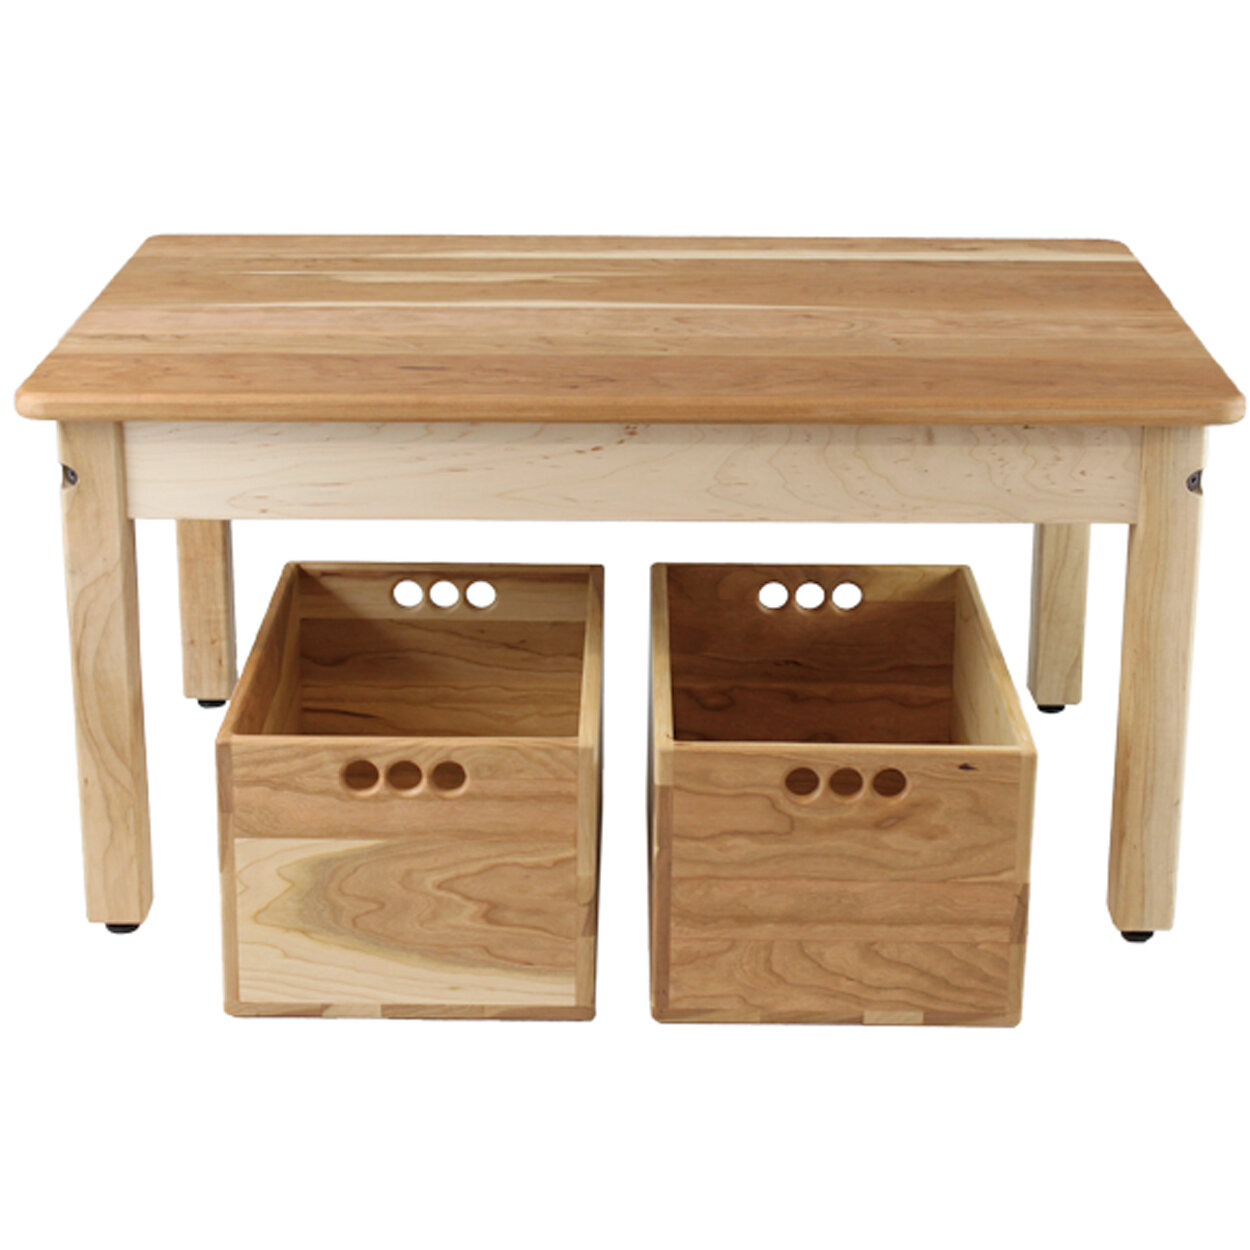 Childrens play table with storage 9